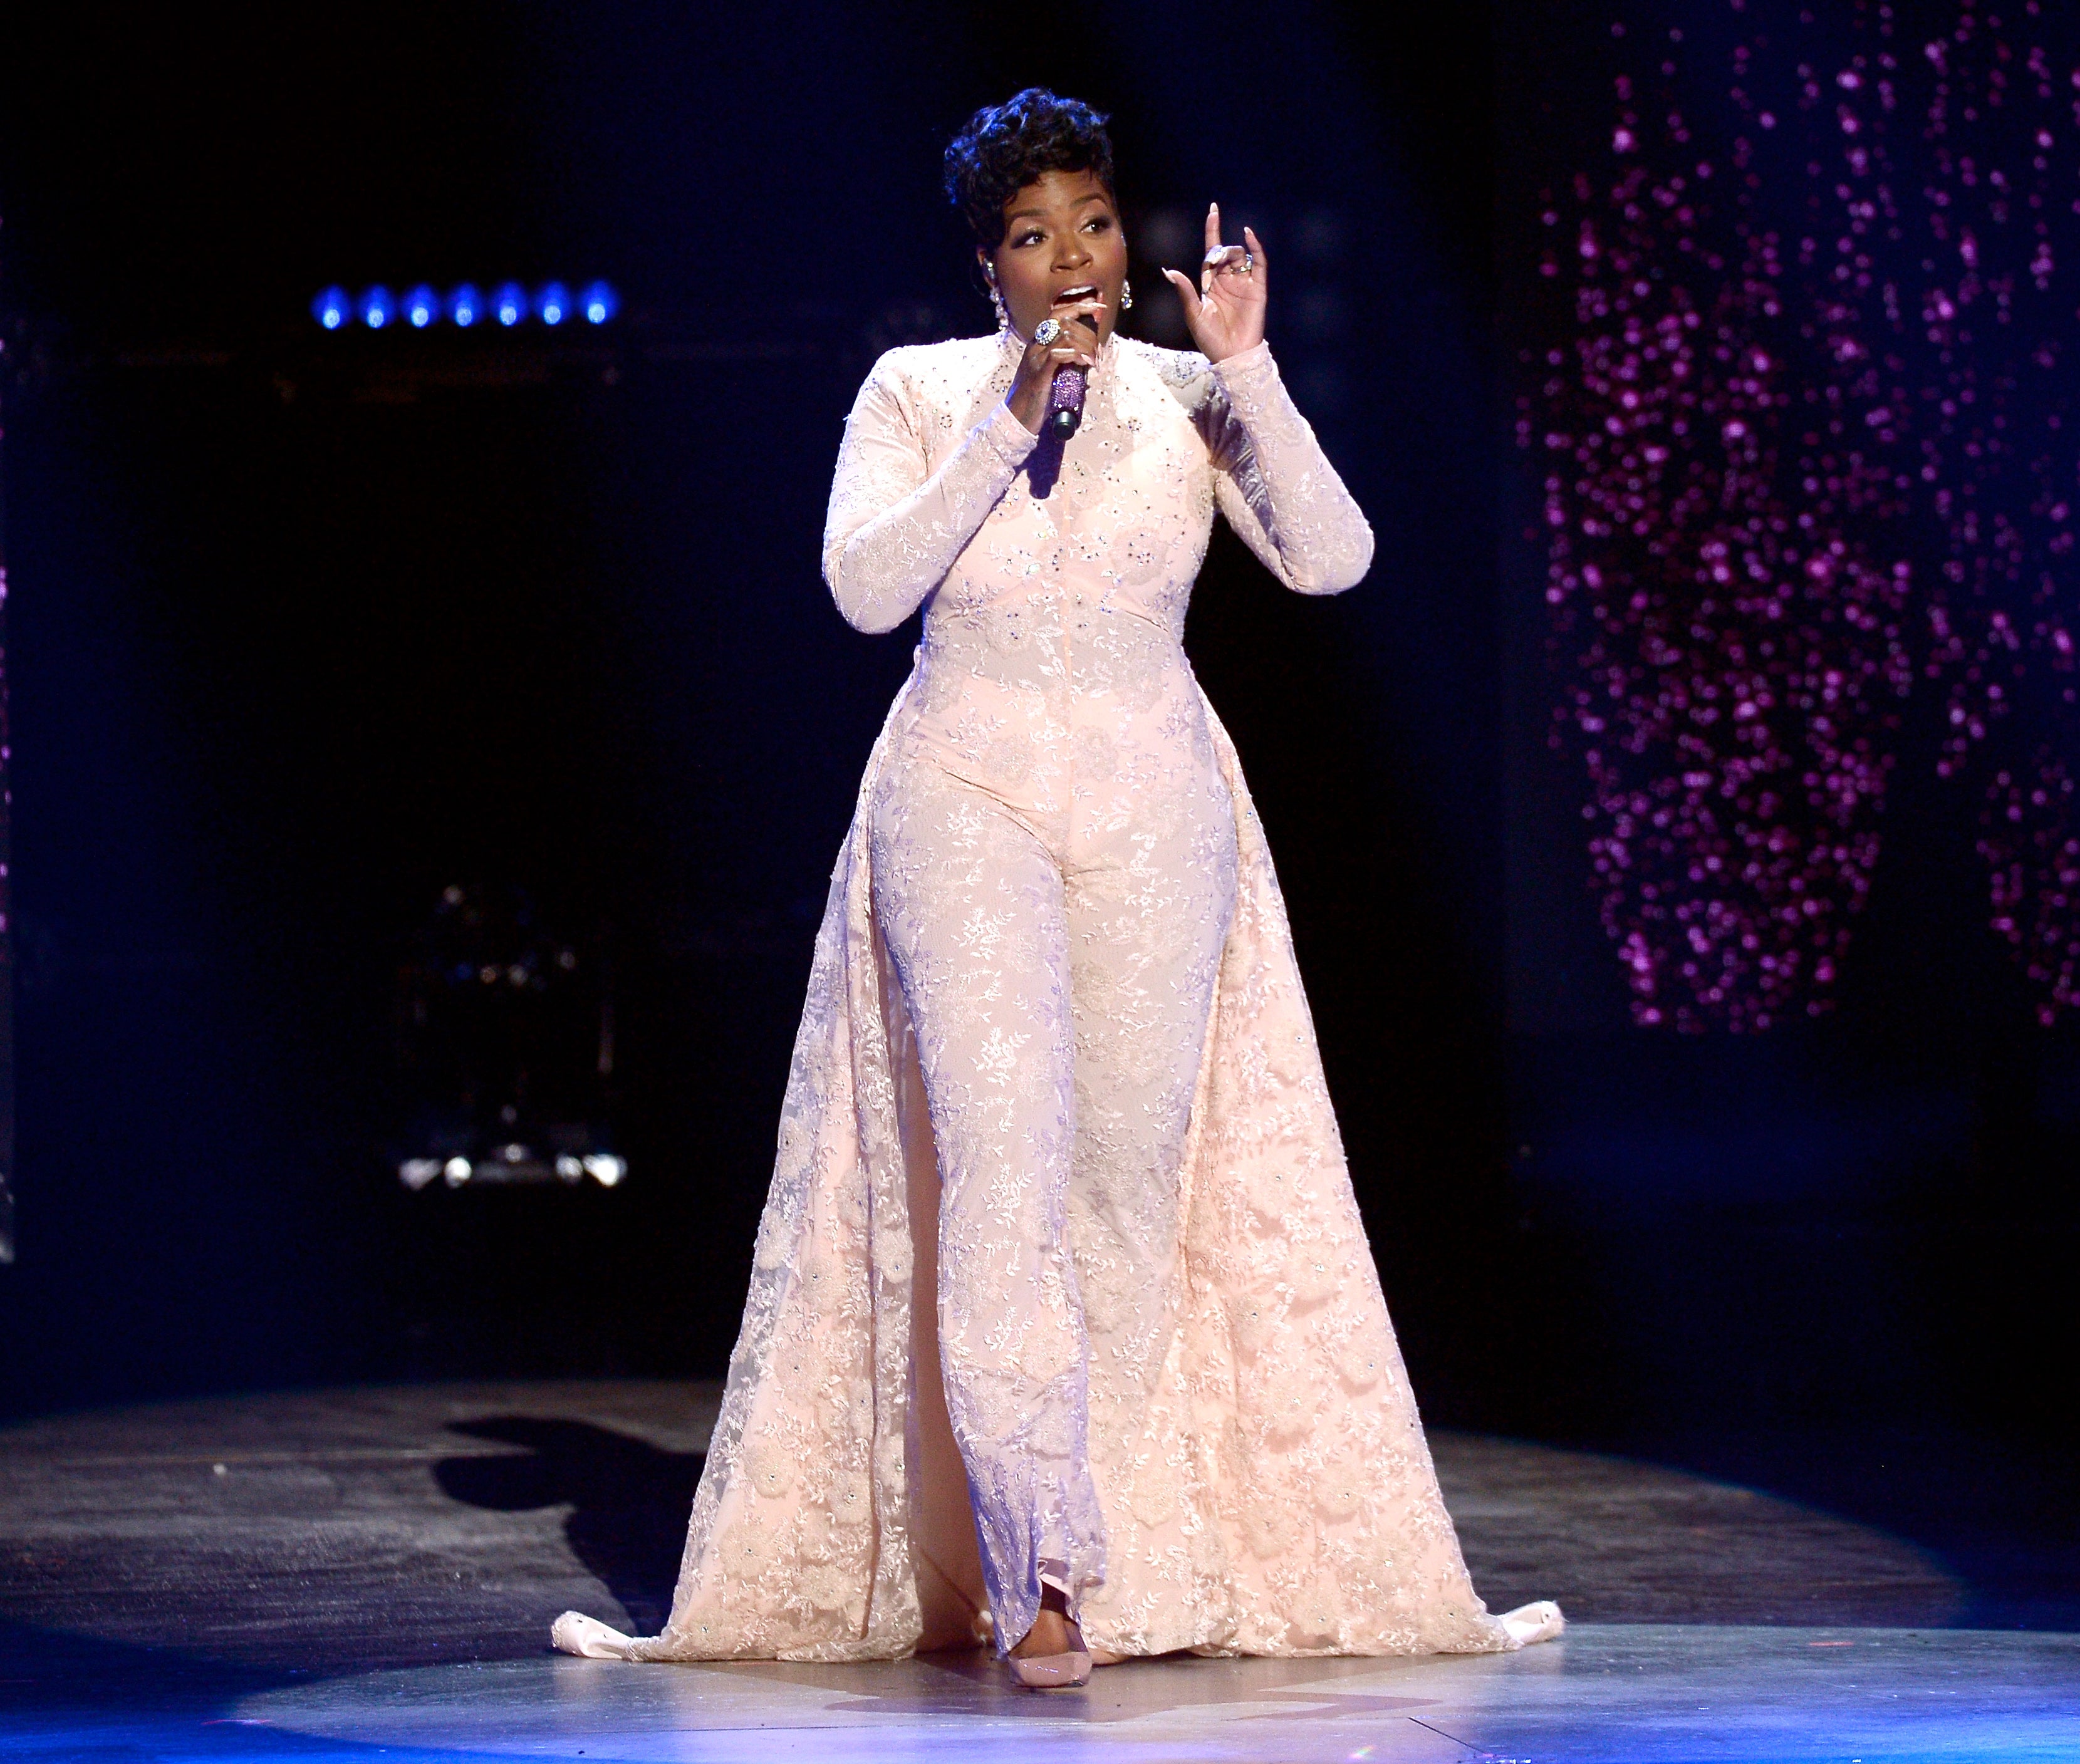 10 Times Fantasia's Style Slayed On and Off The Stage
